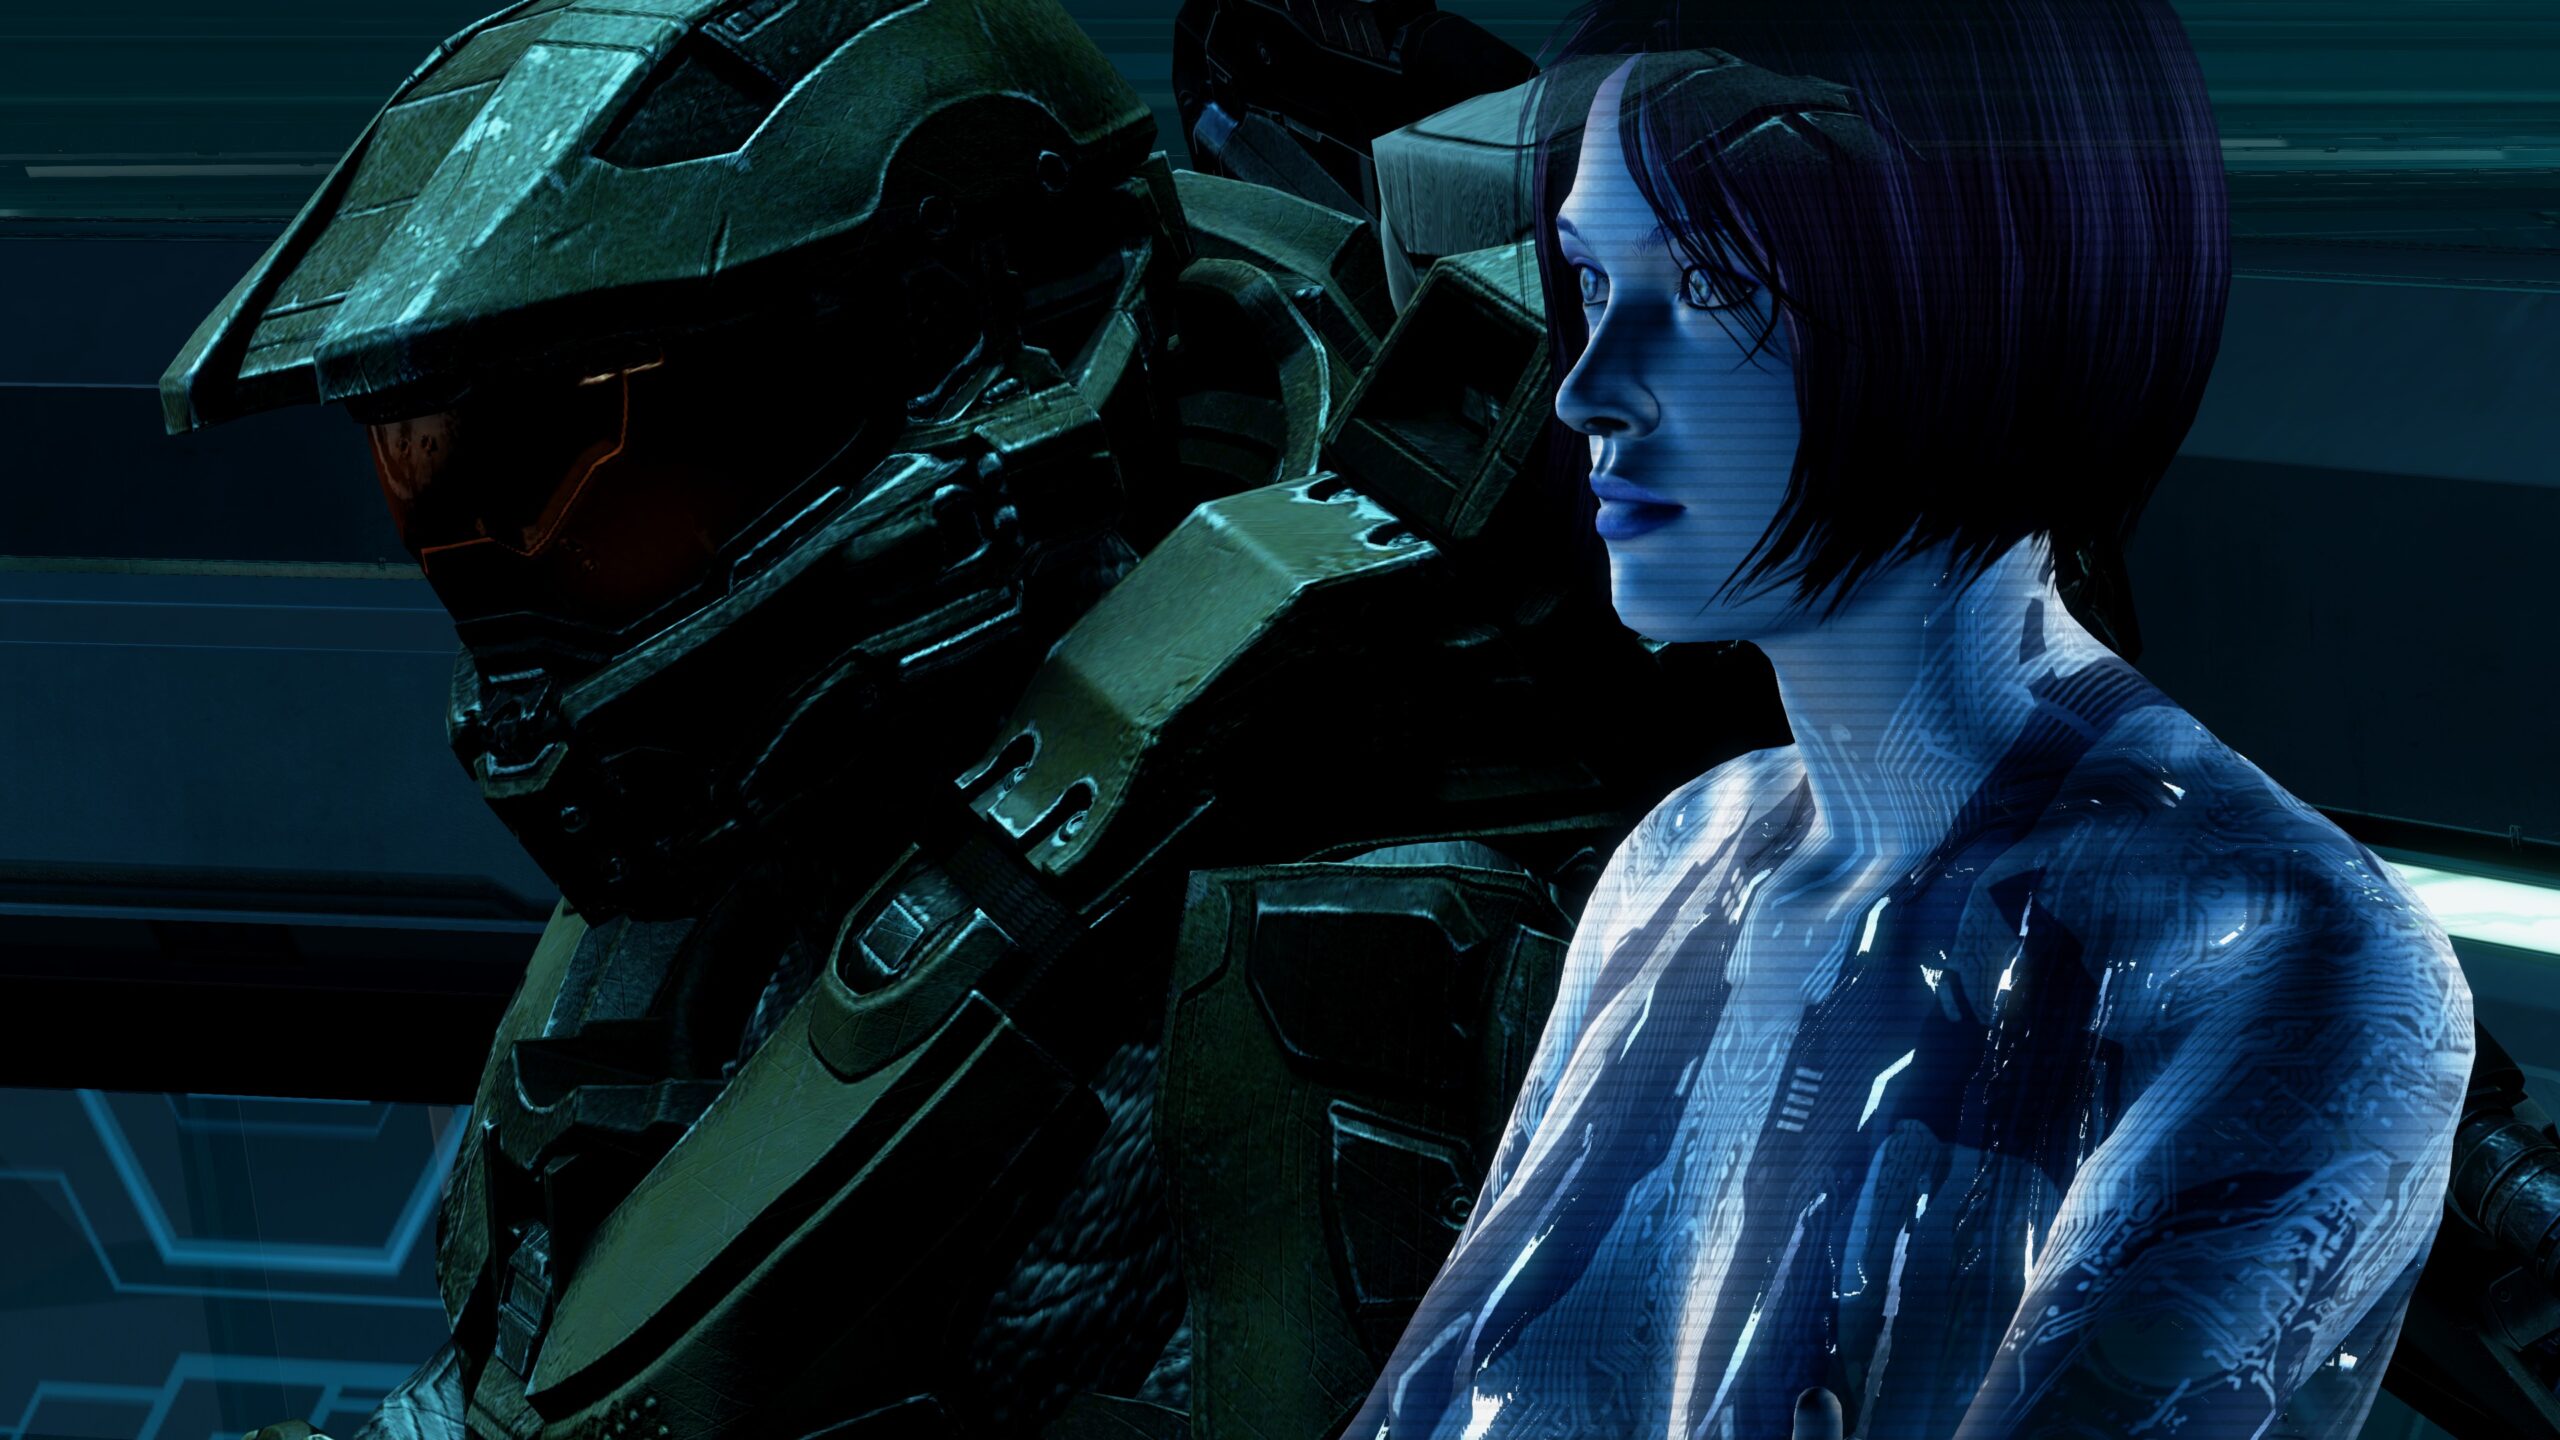 Halo 4 in-game screenshot of the Master Chief and Cortana